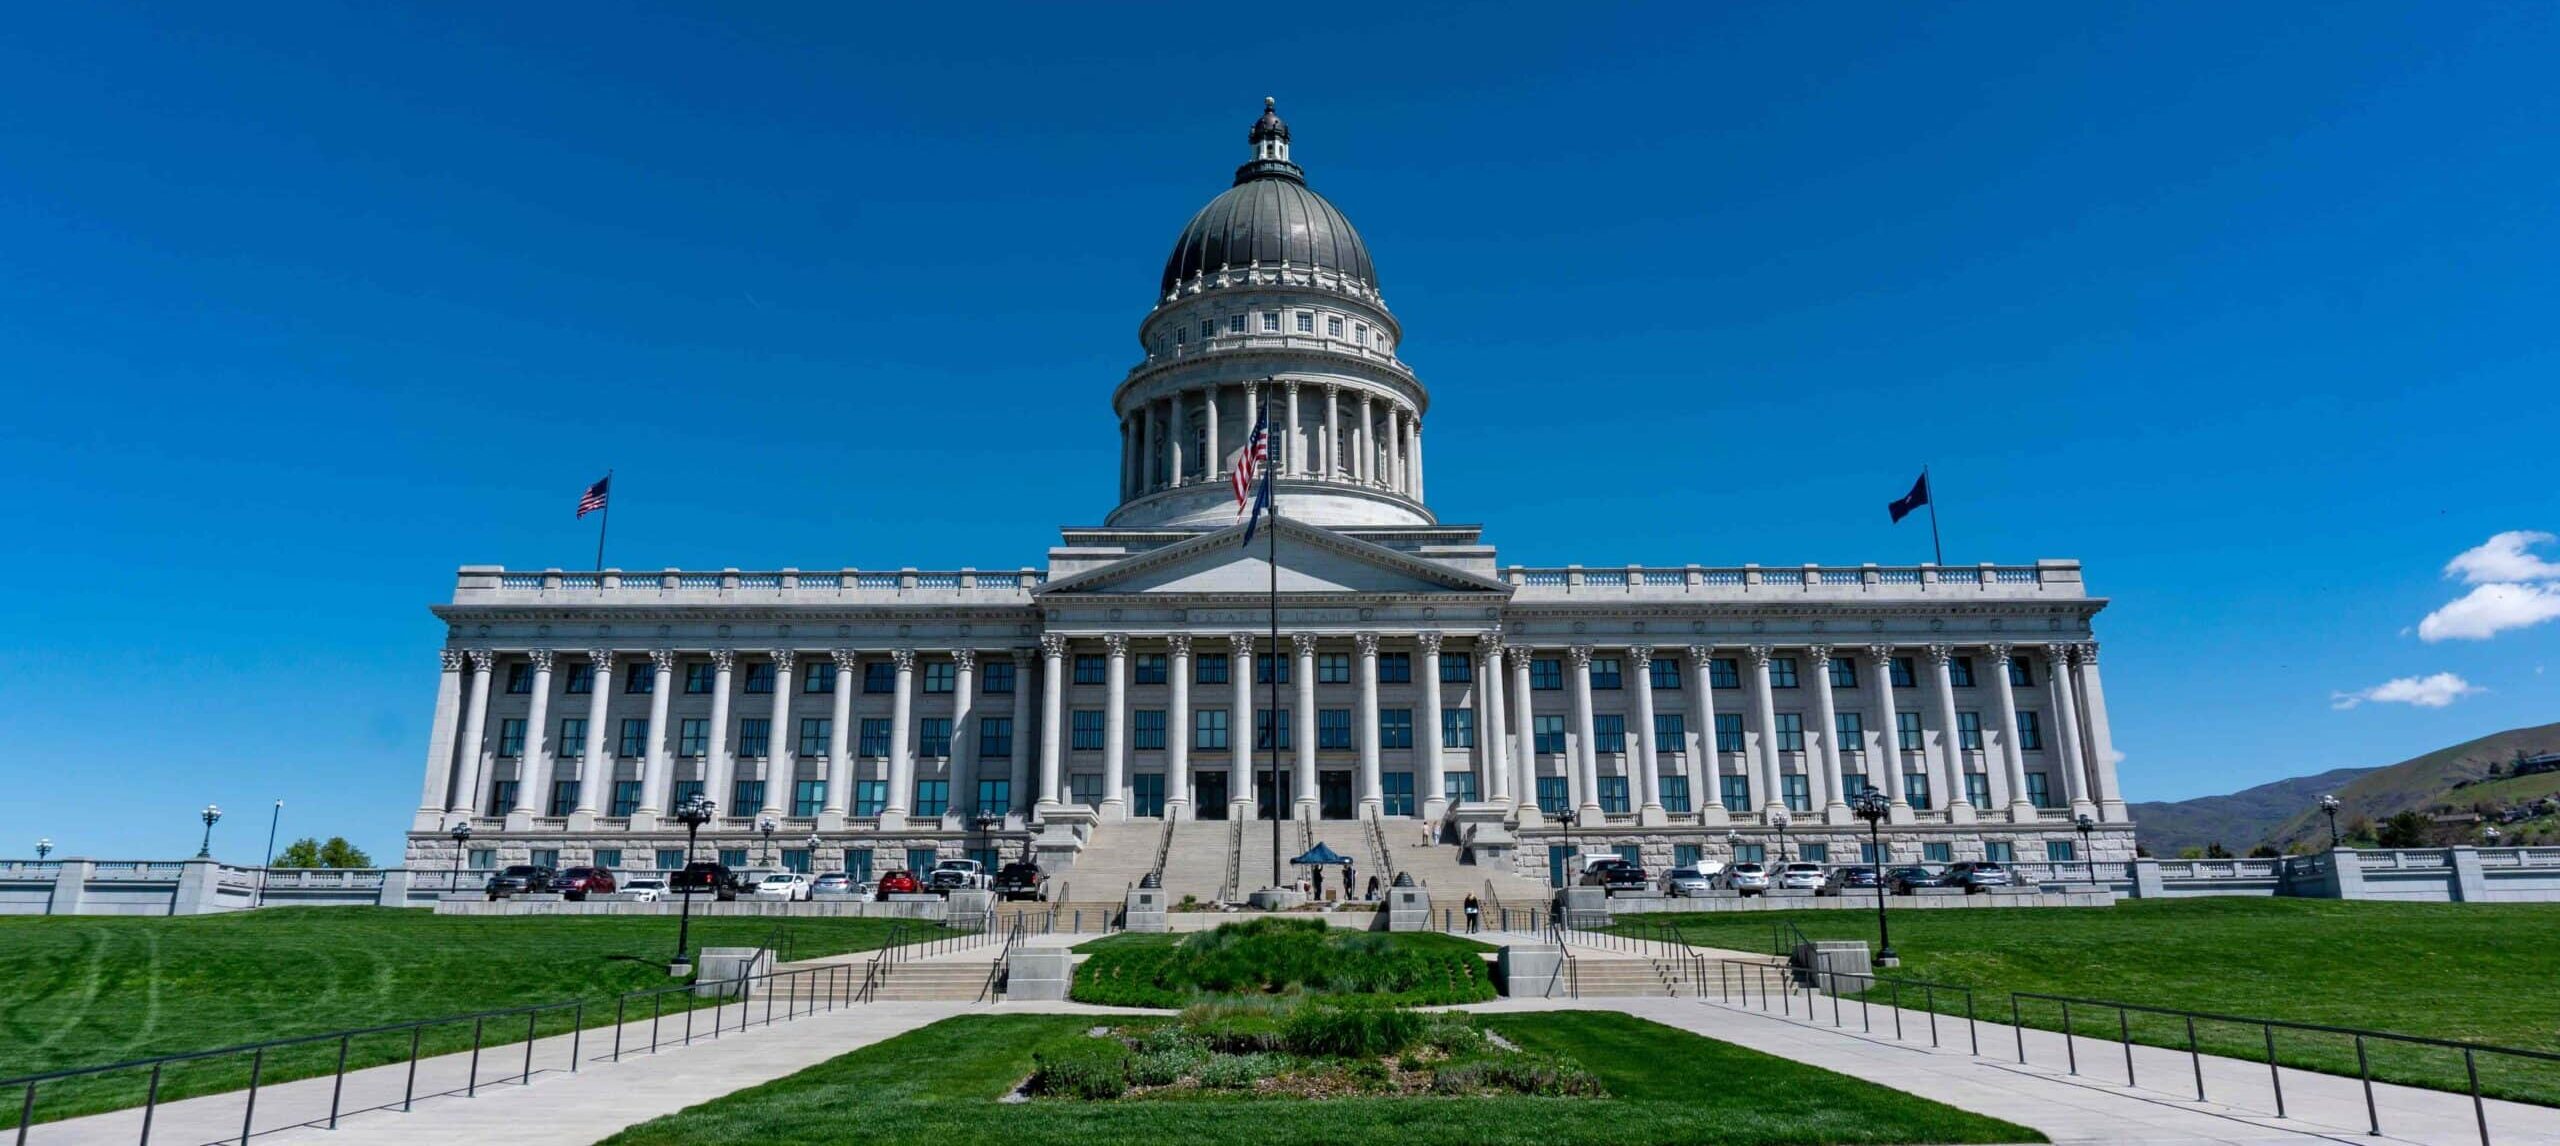 Utah State Capitol Building during the day